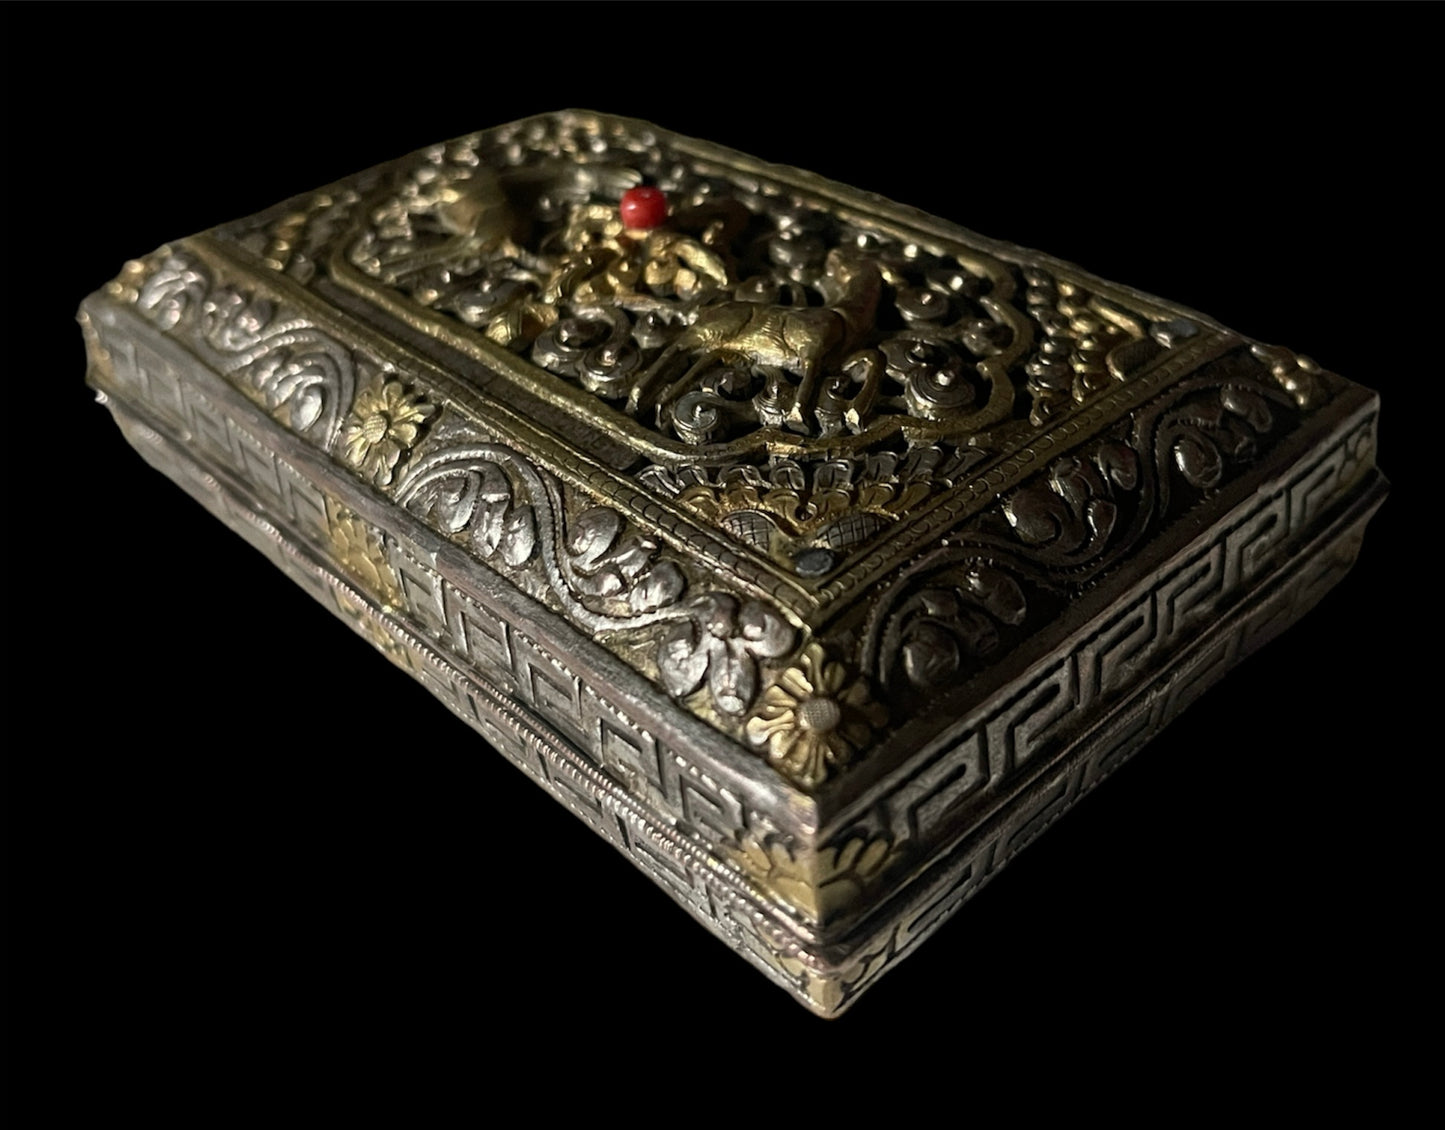 Antique silver and gilded silver Bhutanese betel nut box